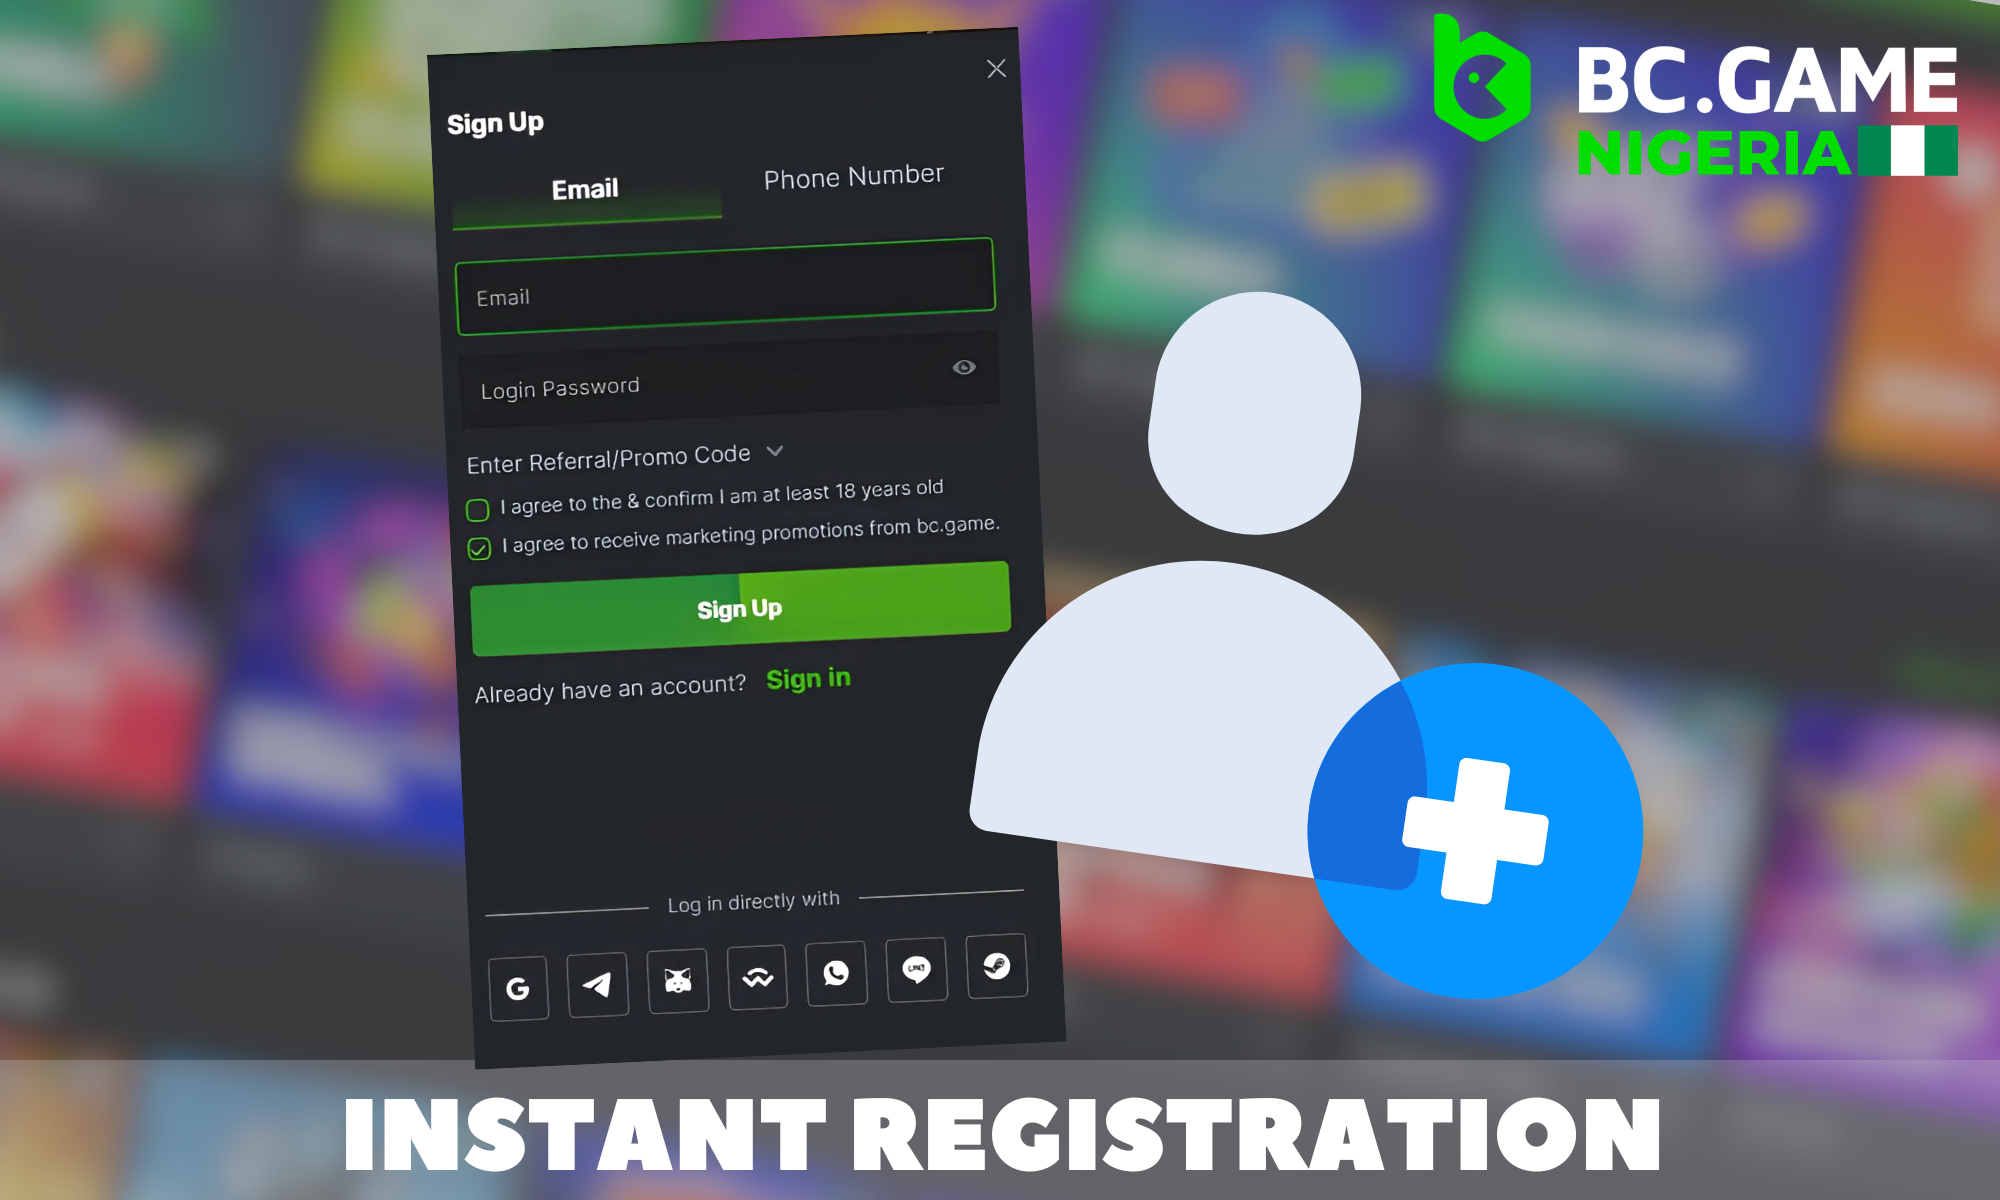 A few simple steps to complete instant registration with BC Game